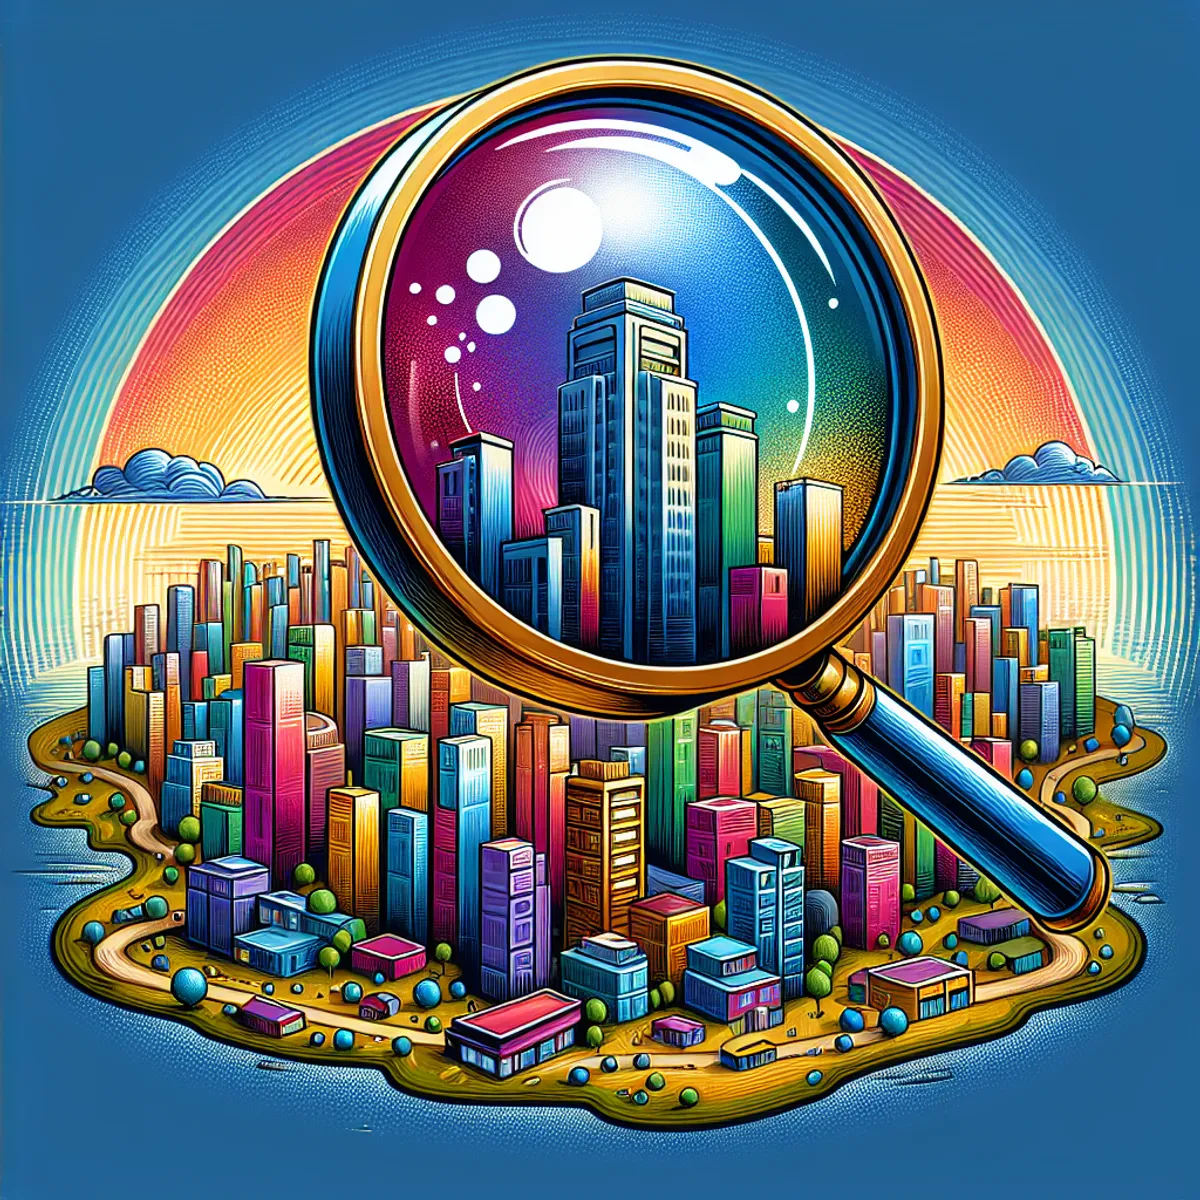 A magnifying glass hovers over a vibrant city skyline, zooming in on a single highlighted skyscraper.